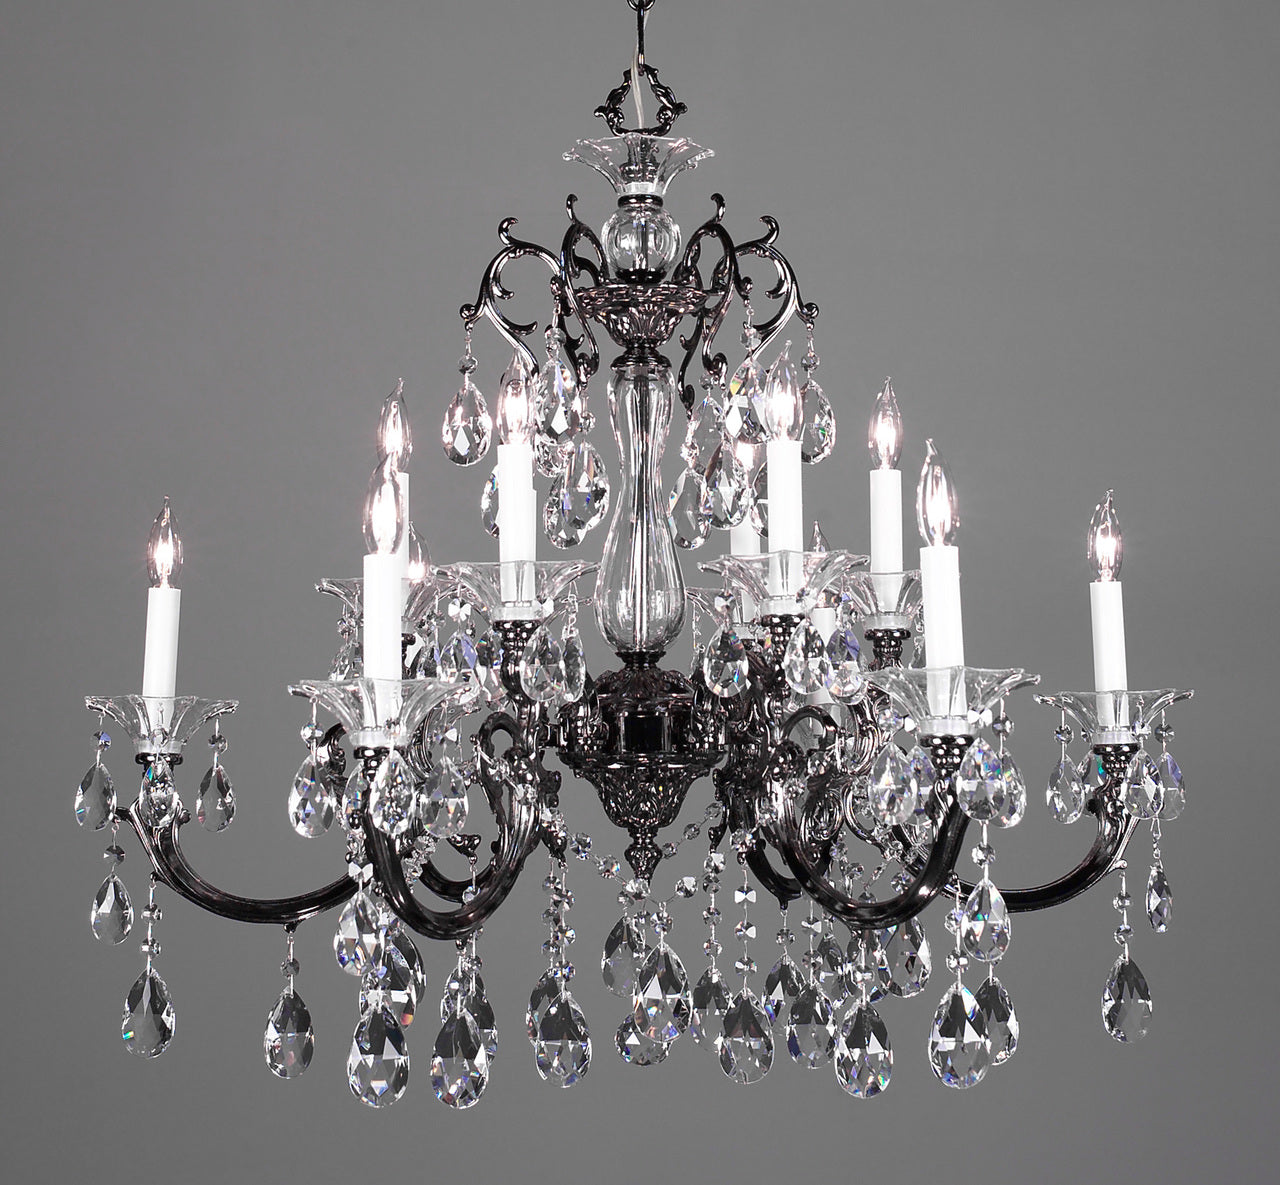 Classic Lighting 57063 EP SC Via Lombardi Crystal Chandelier in Ebony Pearl (Imported from Spain)